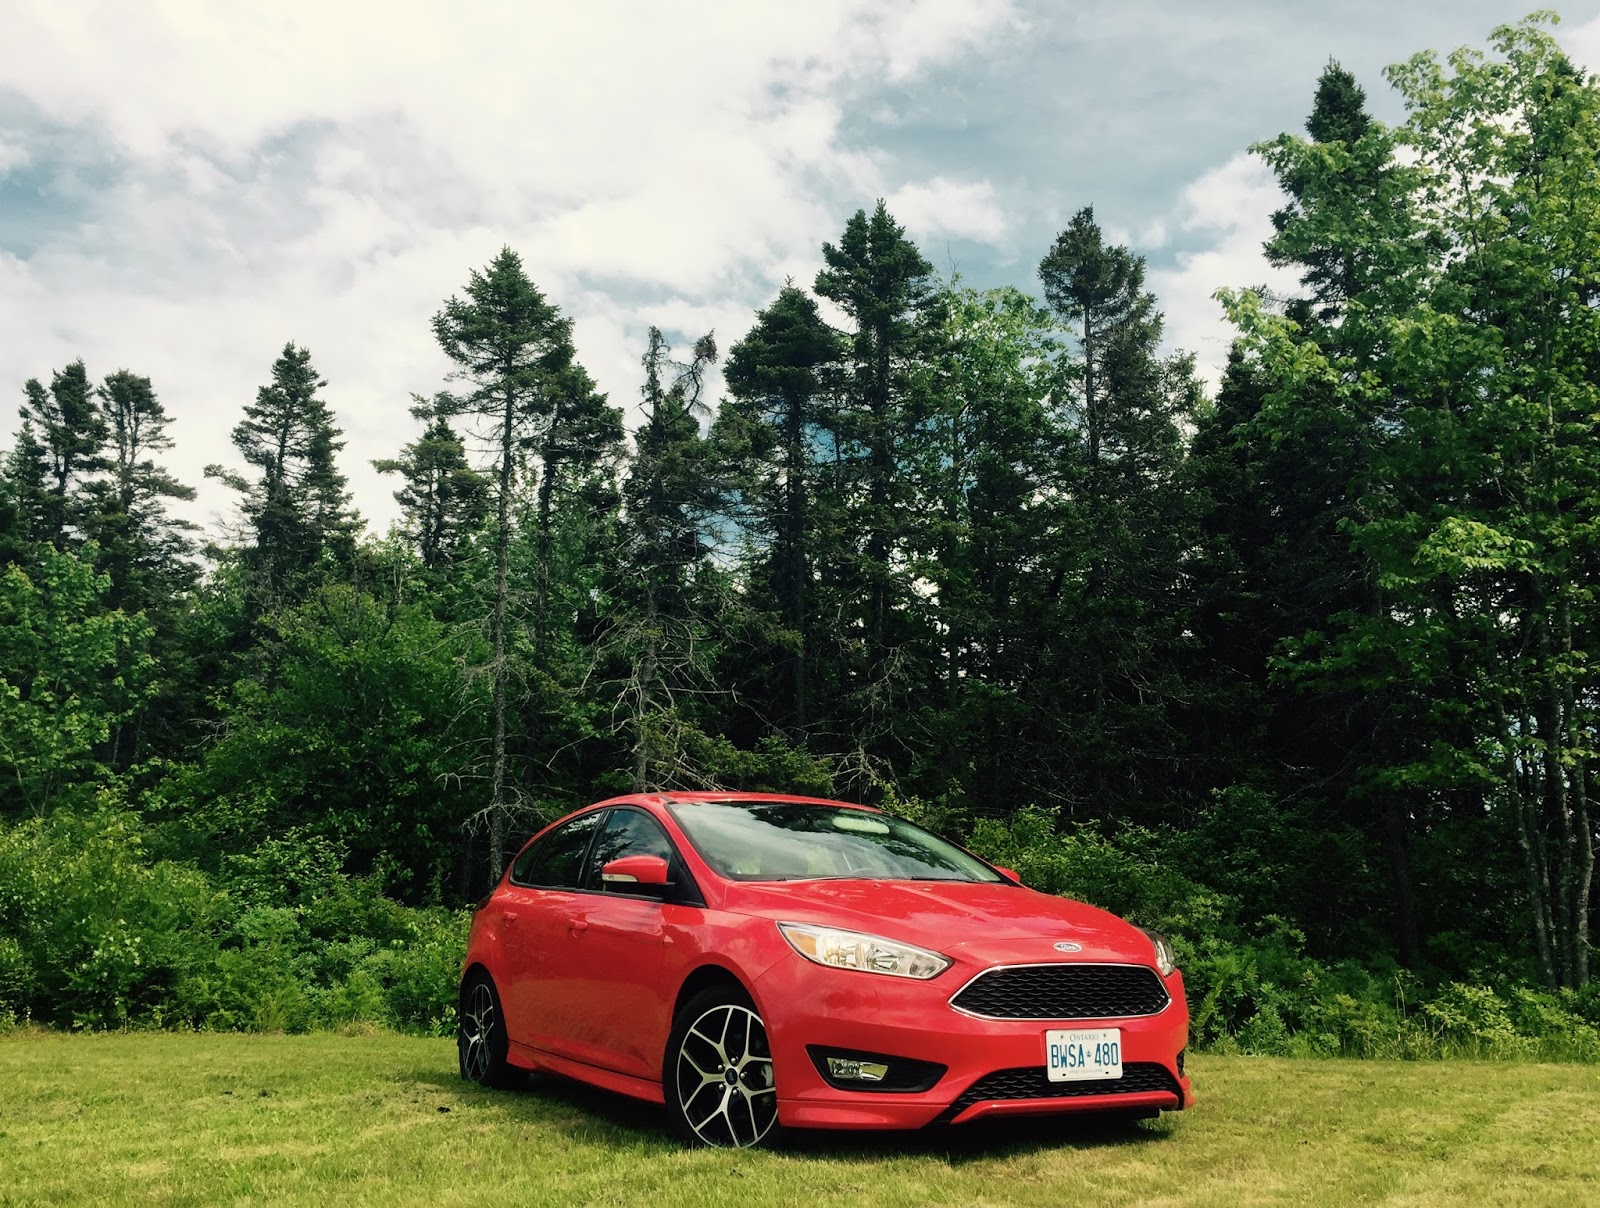 2015 Ford Focus Se Hatchback Review Charming Chassis